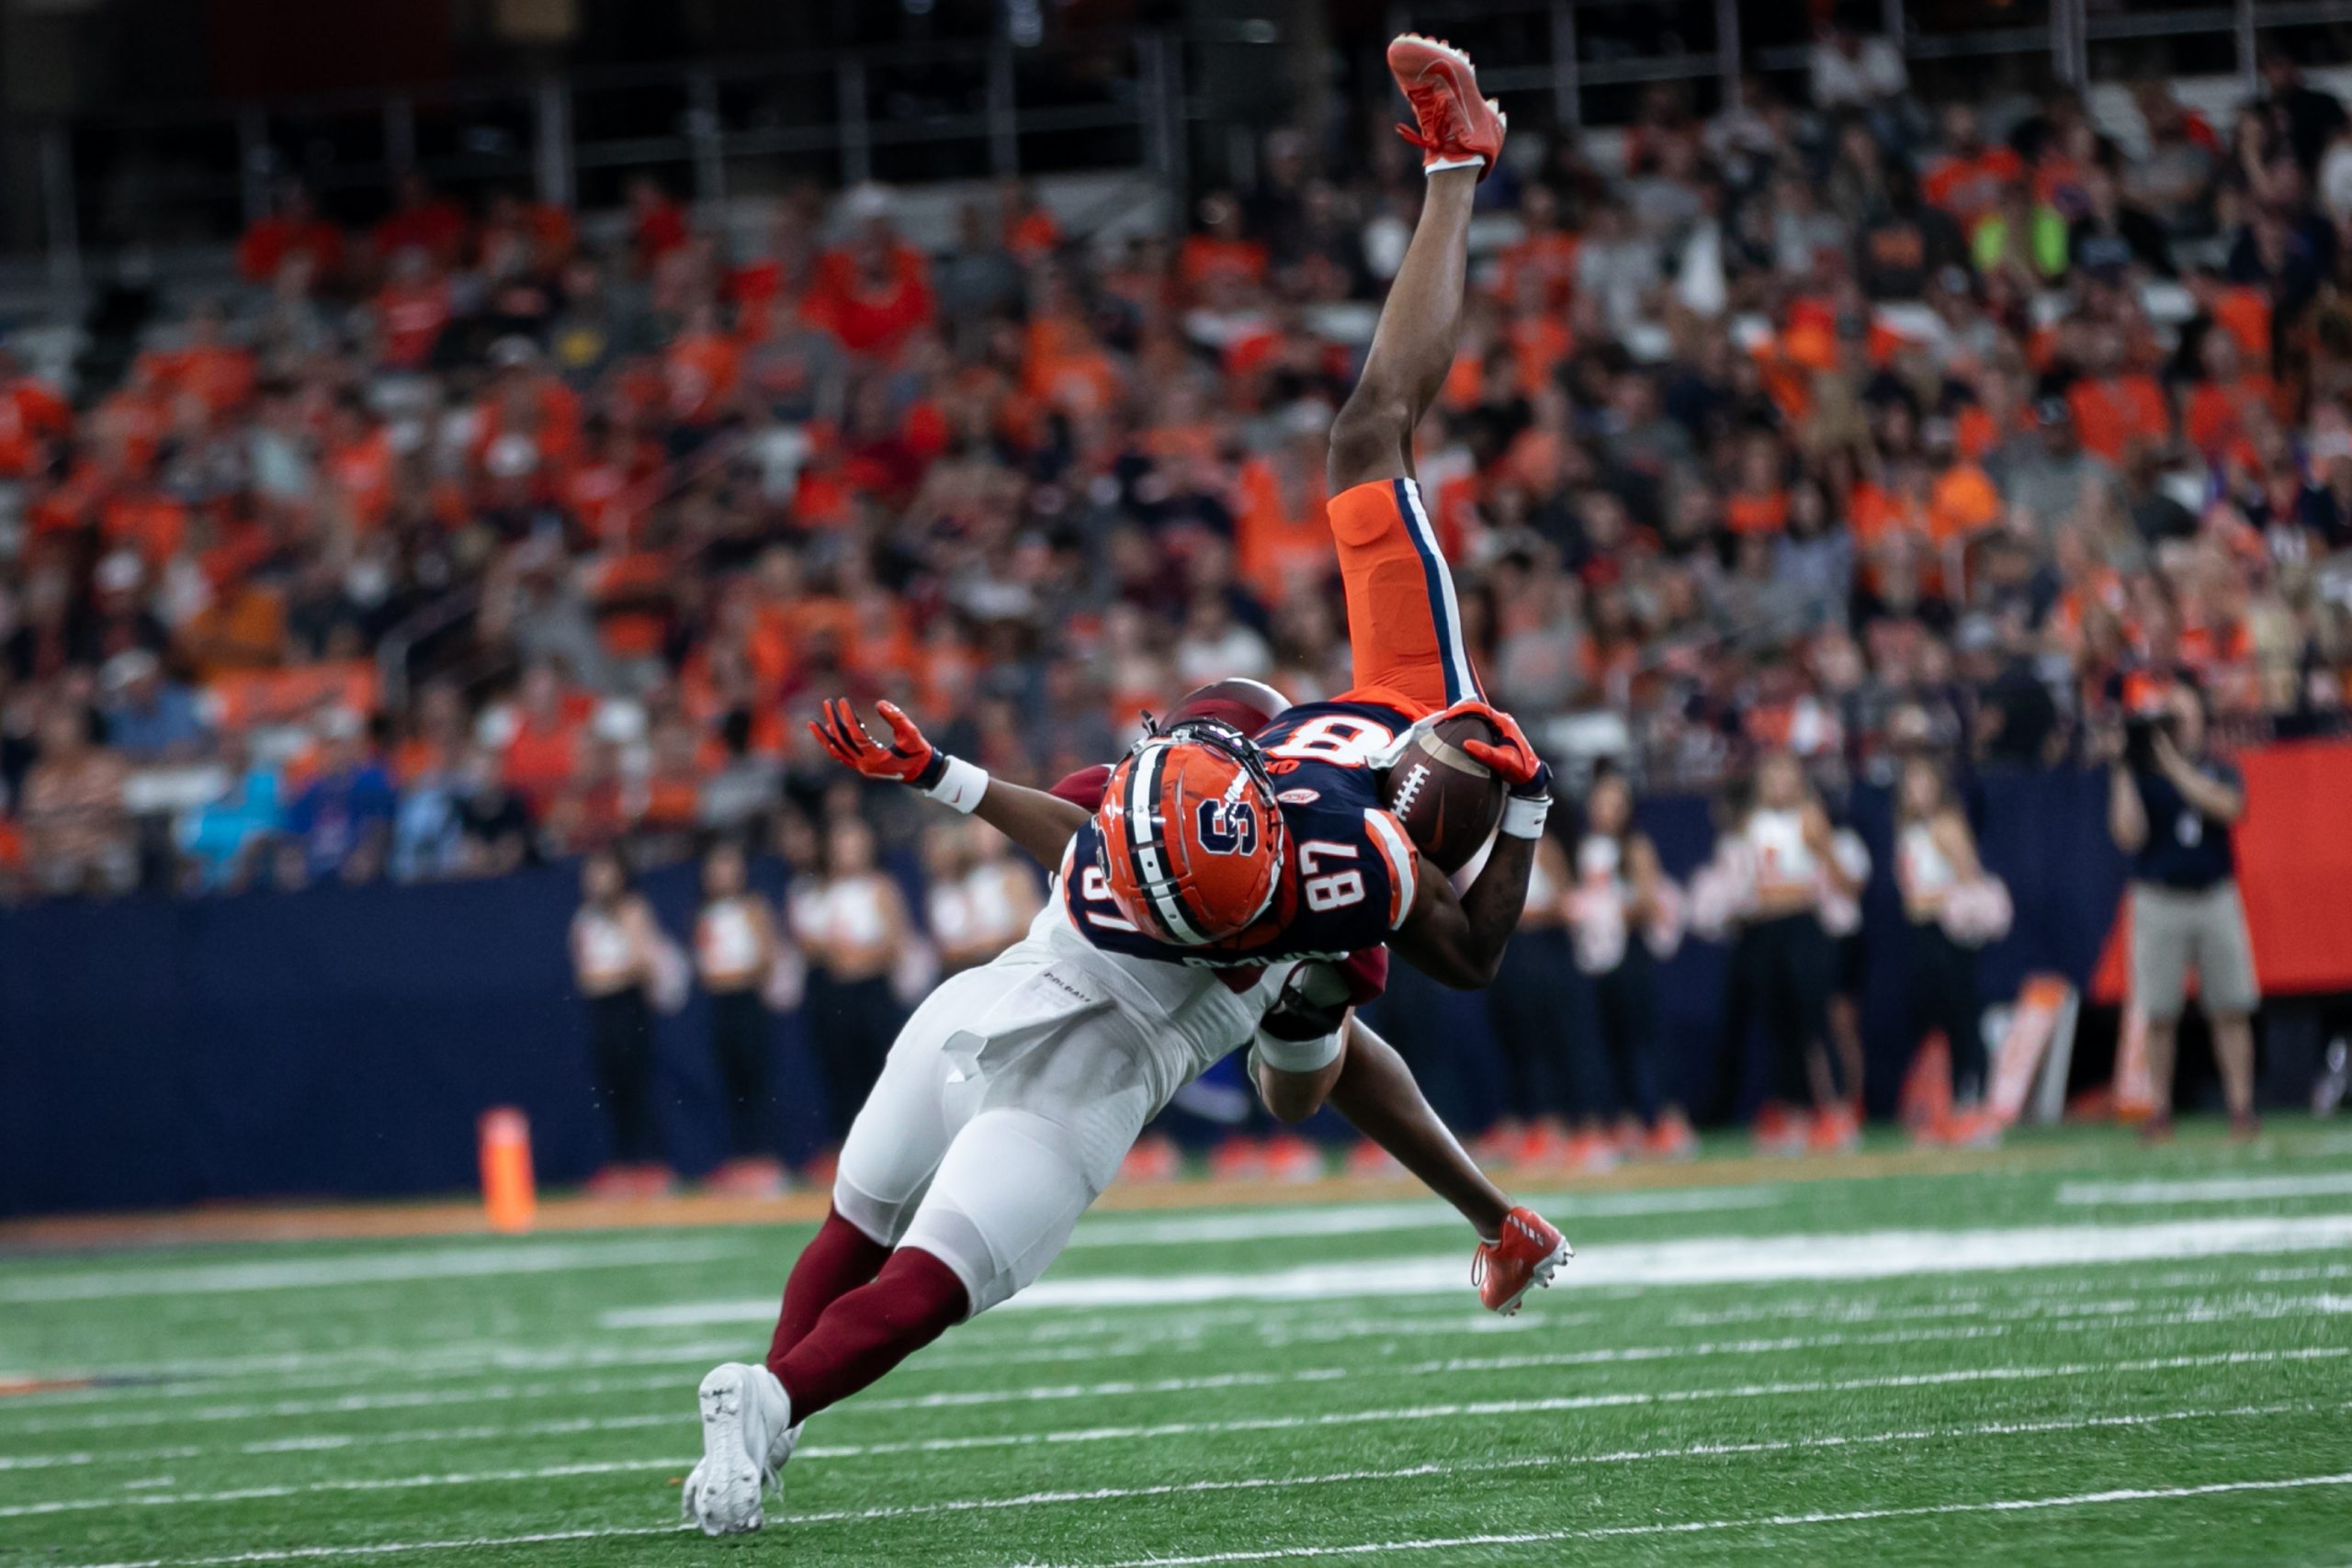 Colagte's Sage Luther (29) flips Syracuse's Donovan Brown (87) during the season opening game on September 2, 2023 at JMA Wireless Dome. Photo by Kayla Breen.